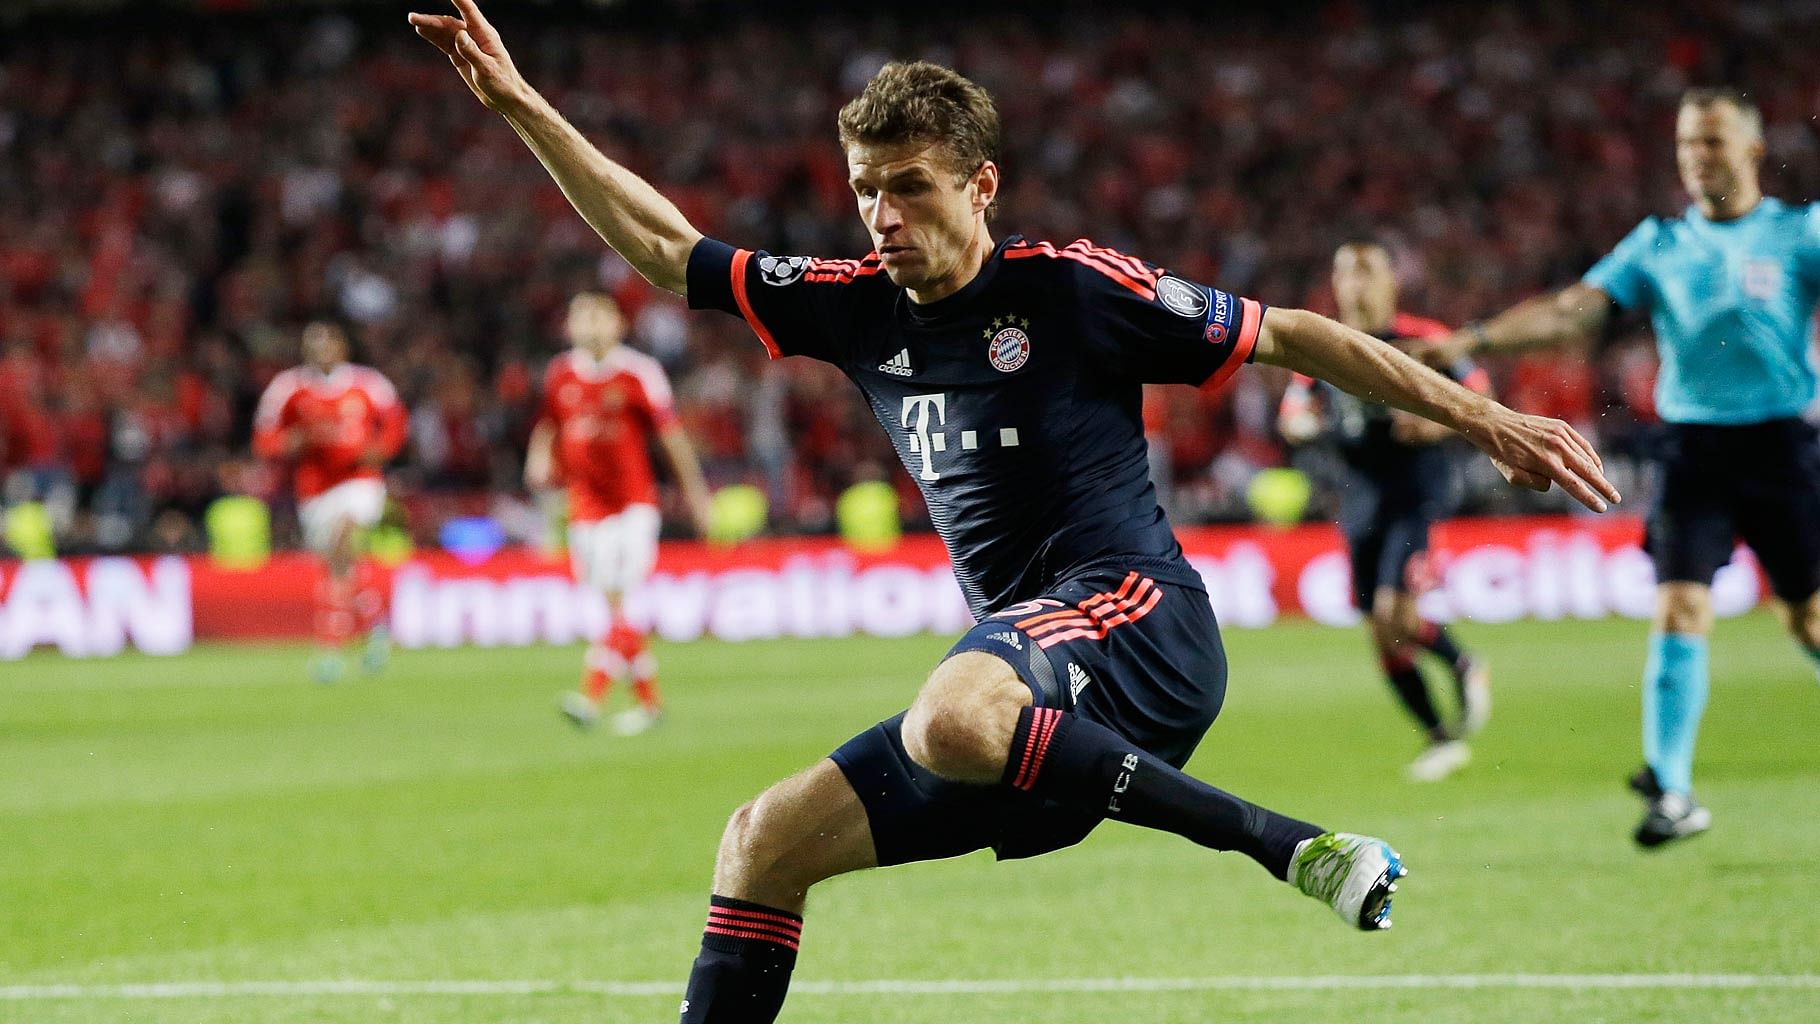 Bayern’s Thomas Mueller in action during the Champions League quarter-final second leg match between Bayern Munich and Benfica. (Photo: AP)